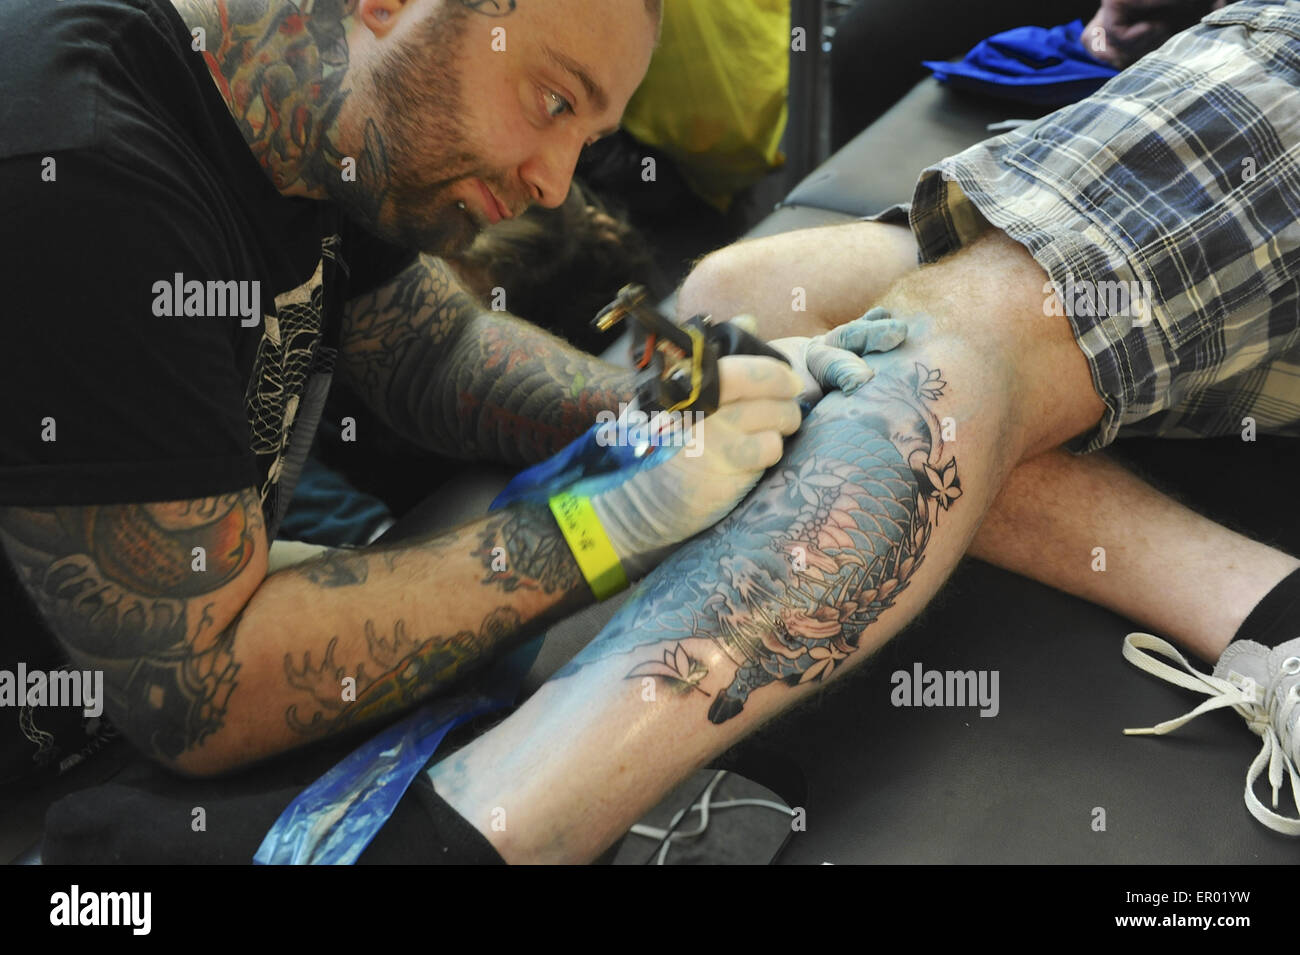 A tattooist at work at The Great British Tattoo Show, a prestigious body  art convention being held at Alexandra Palace, London. The show had 249 tattoo  artists from all around the world